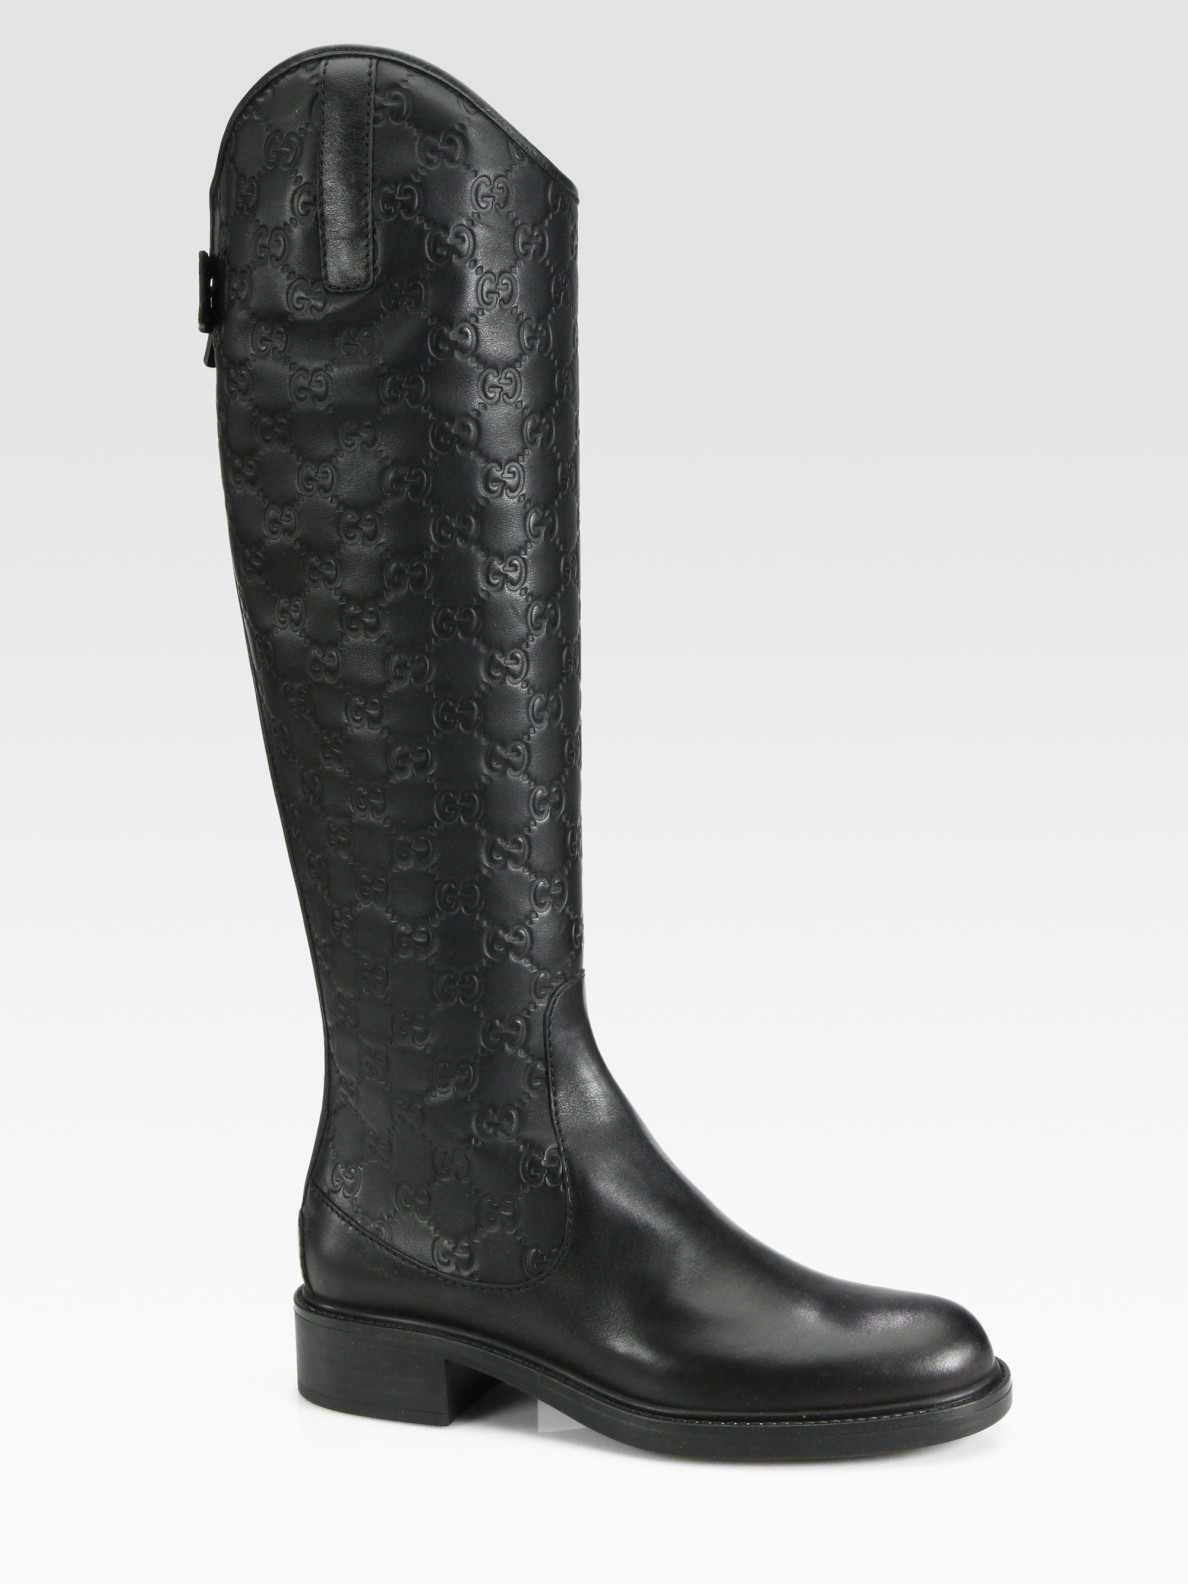 Gucci Maud Leather Knee-High Boots in | Lyst